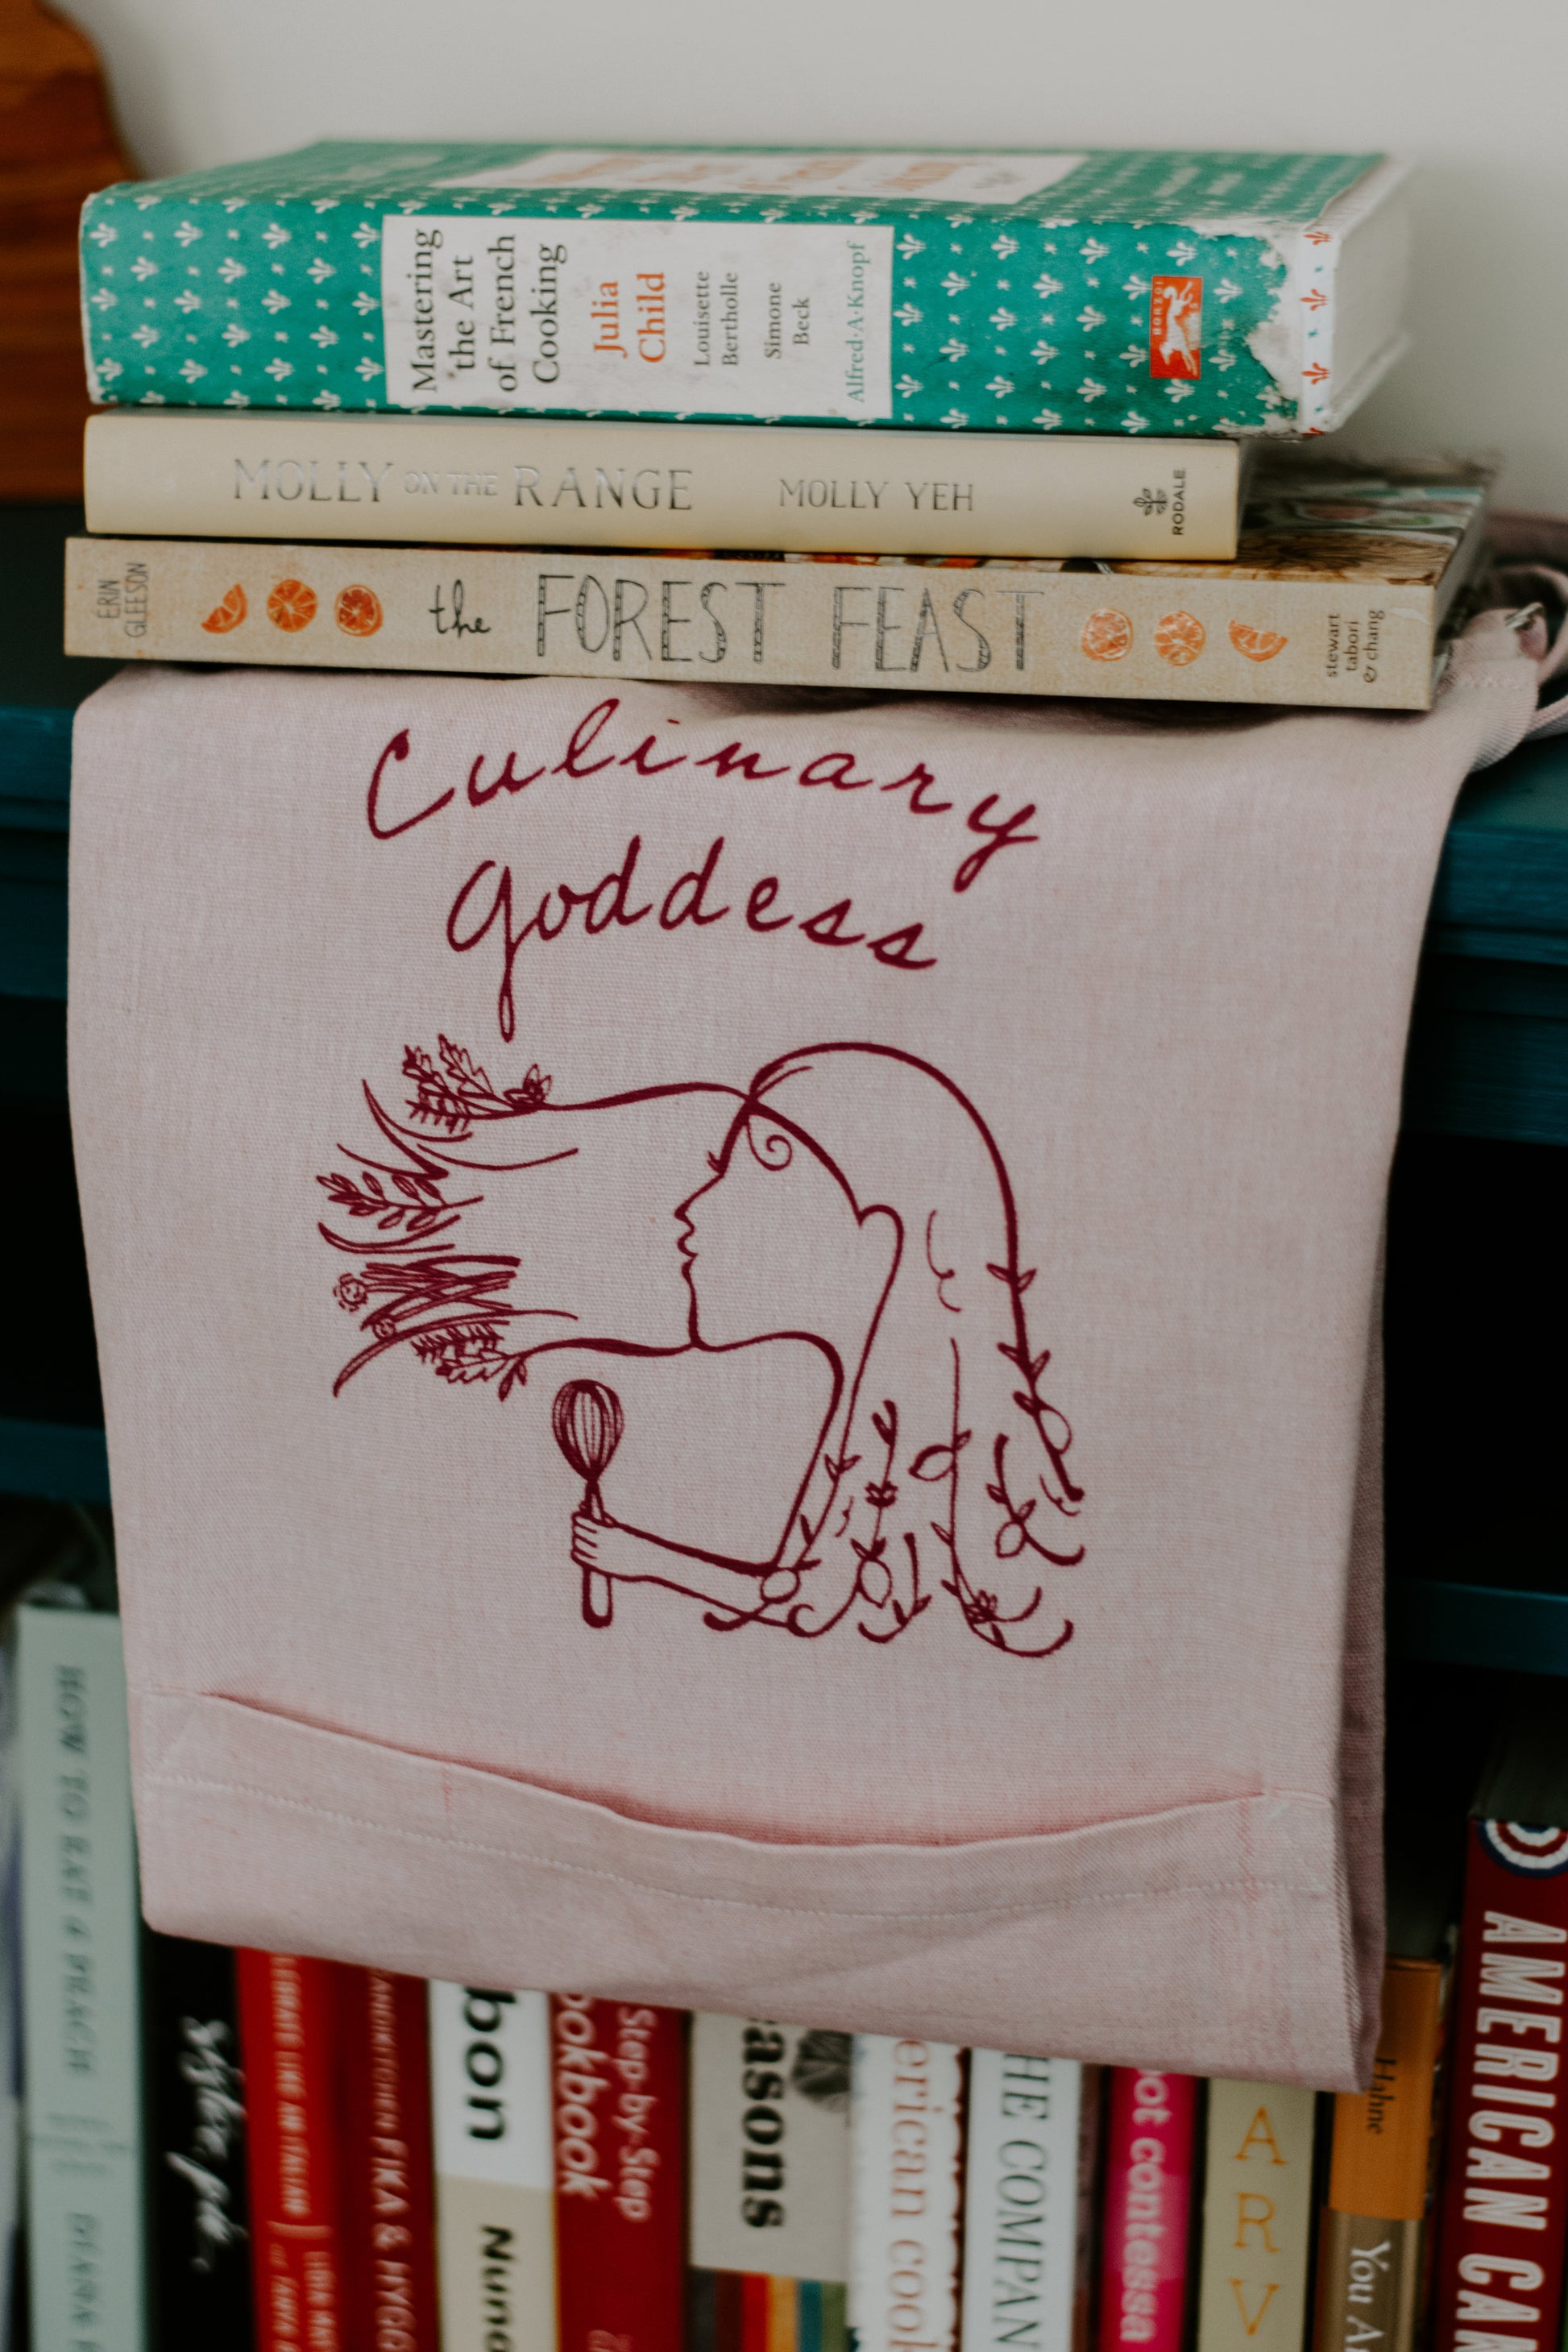 Pink Culinary Goddess apron folded and hung with cookbooks